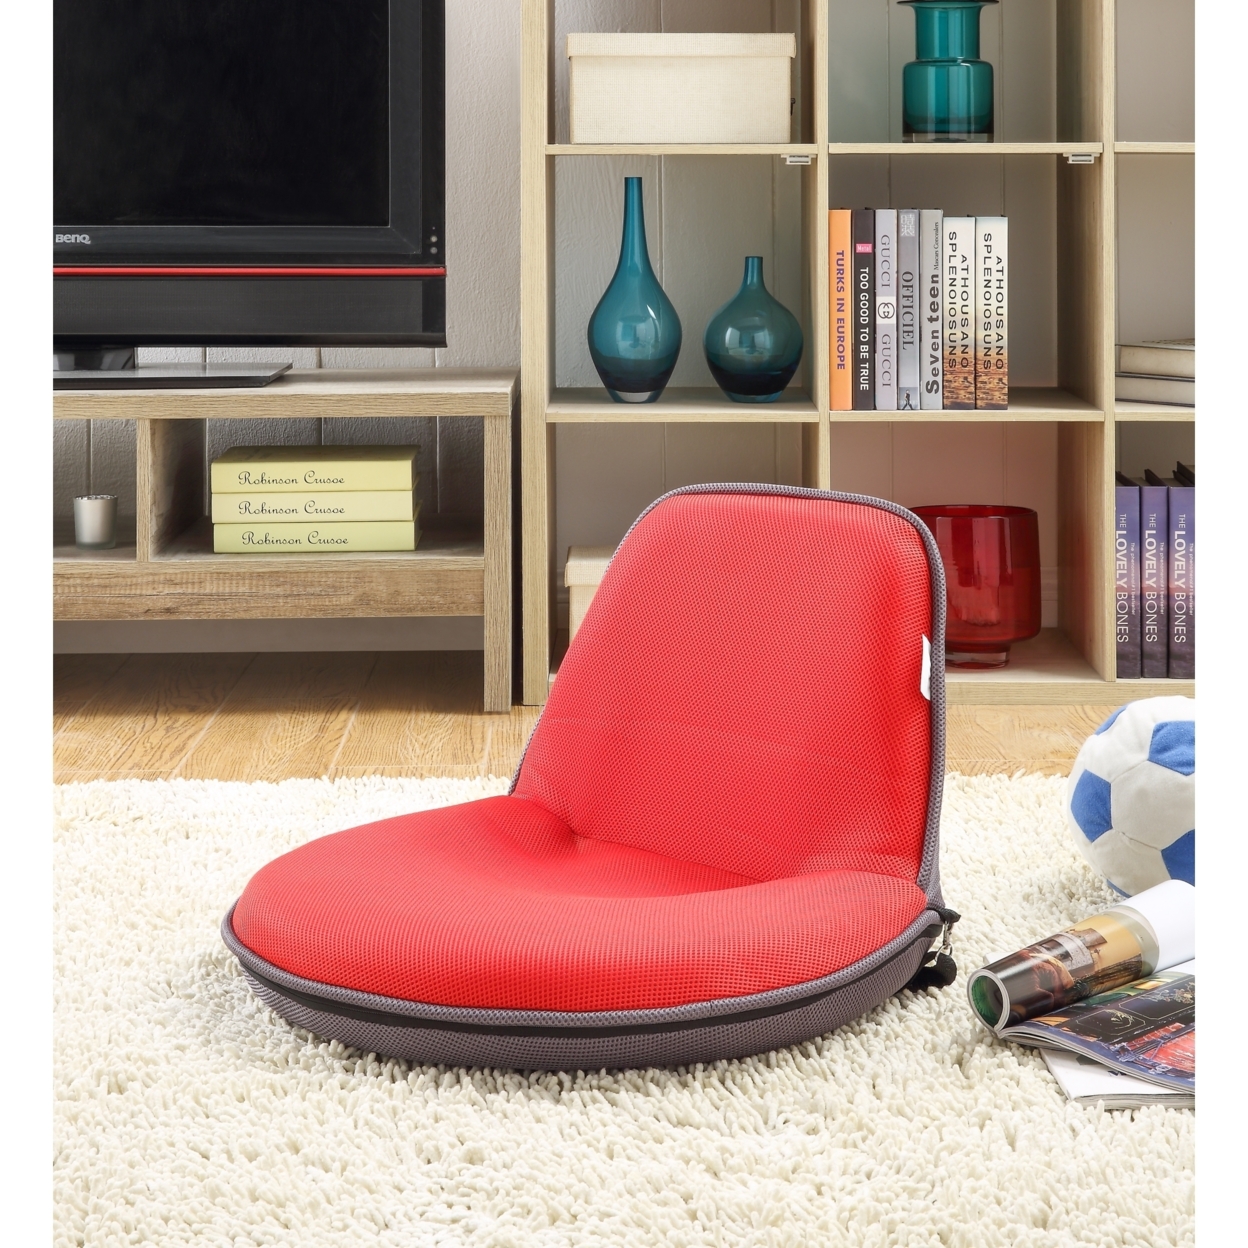 Loungie Quickchair Mesh Floor Chair-Foldable-Portable With Strap-Indoor-Outdoor-by Inspired Home - Red/grey